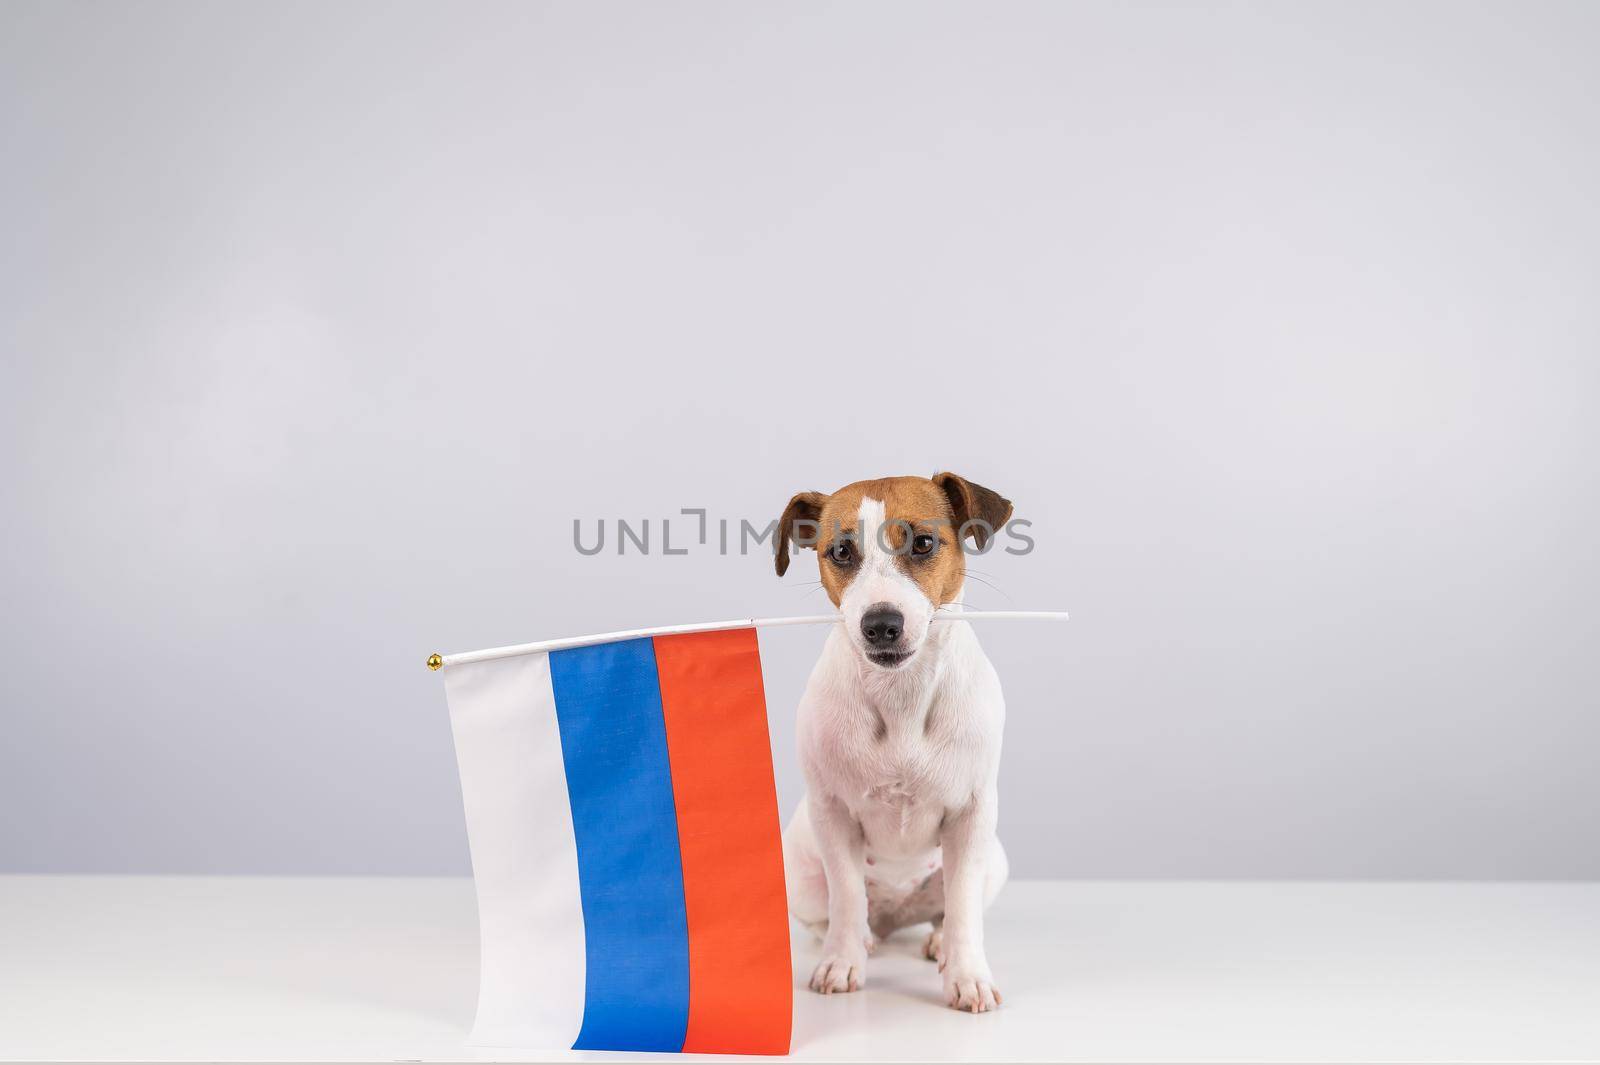 Jack Russell Terrier dog holding a small flag of the Russian Federation on a white background